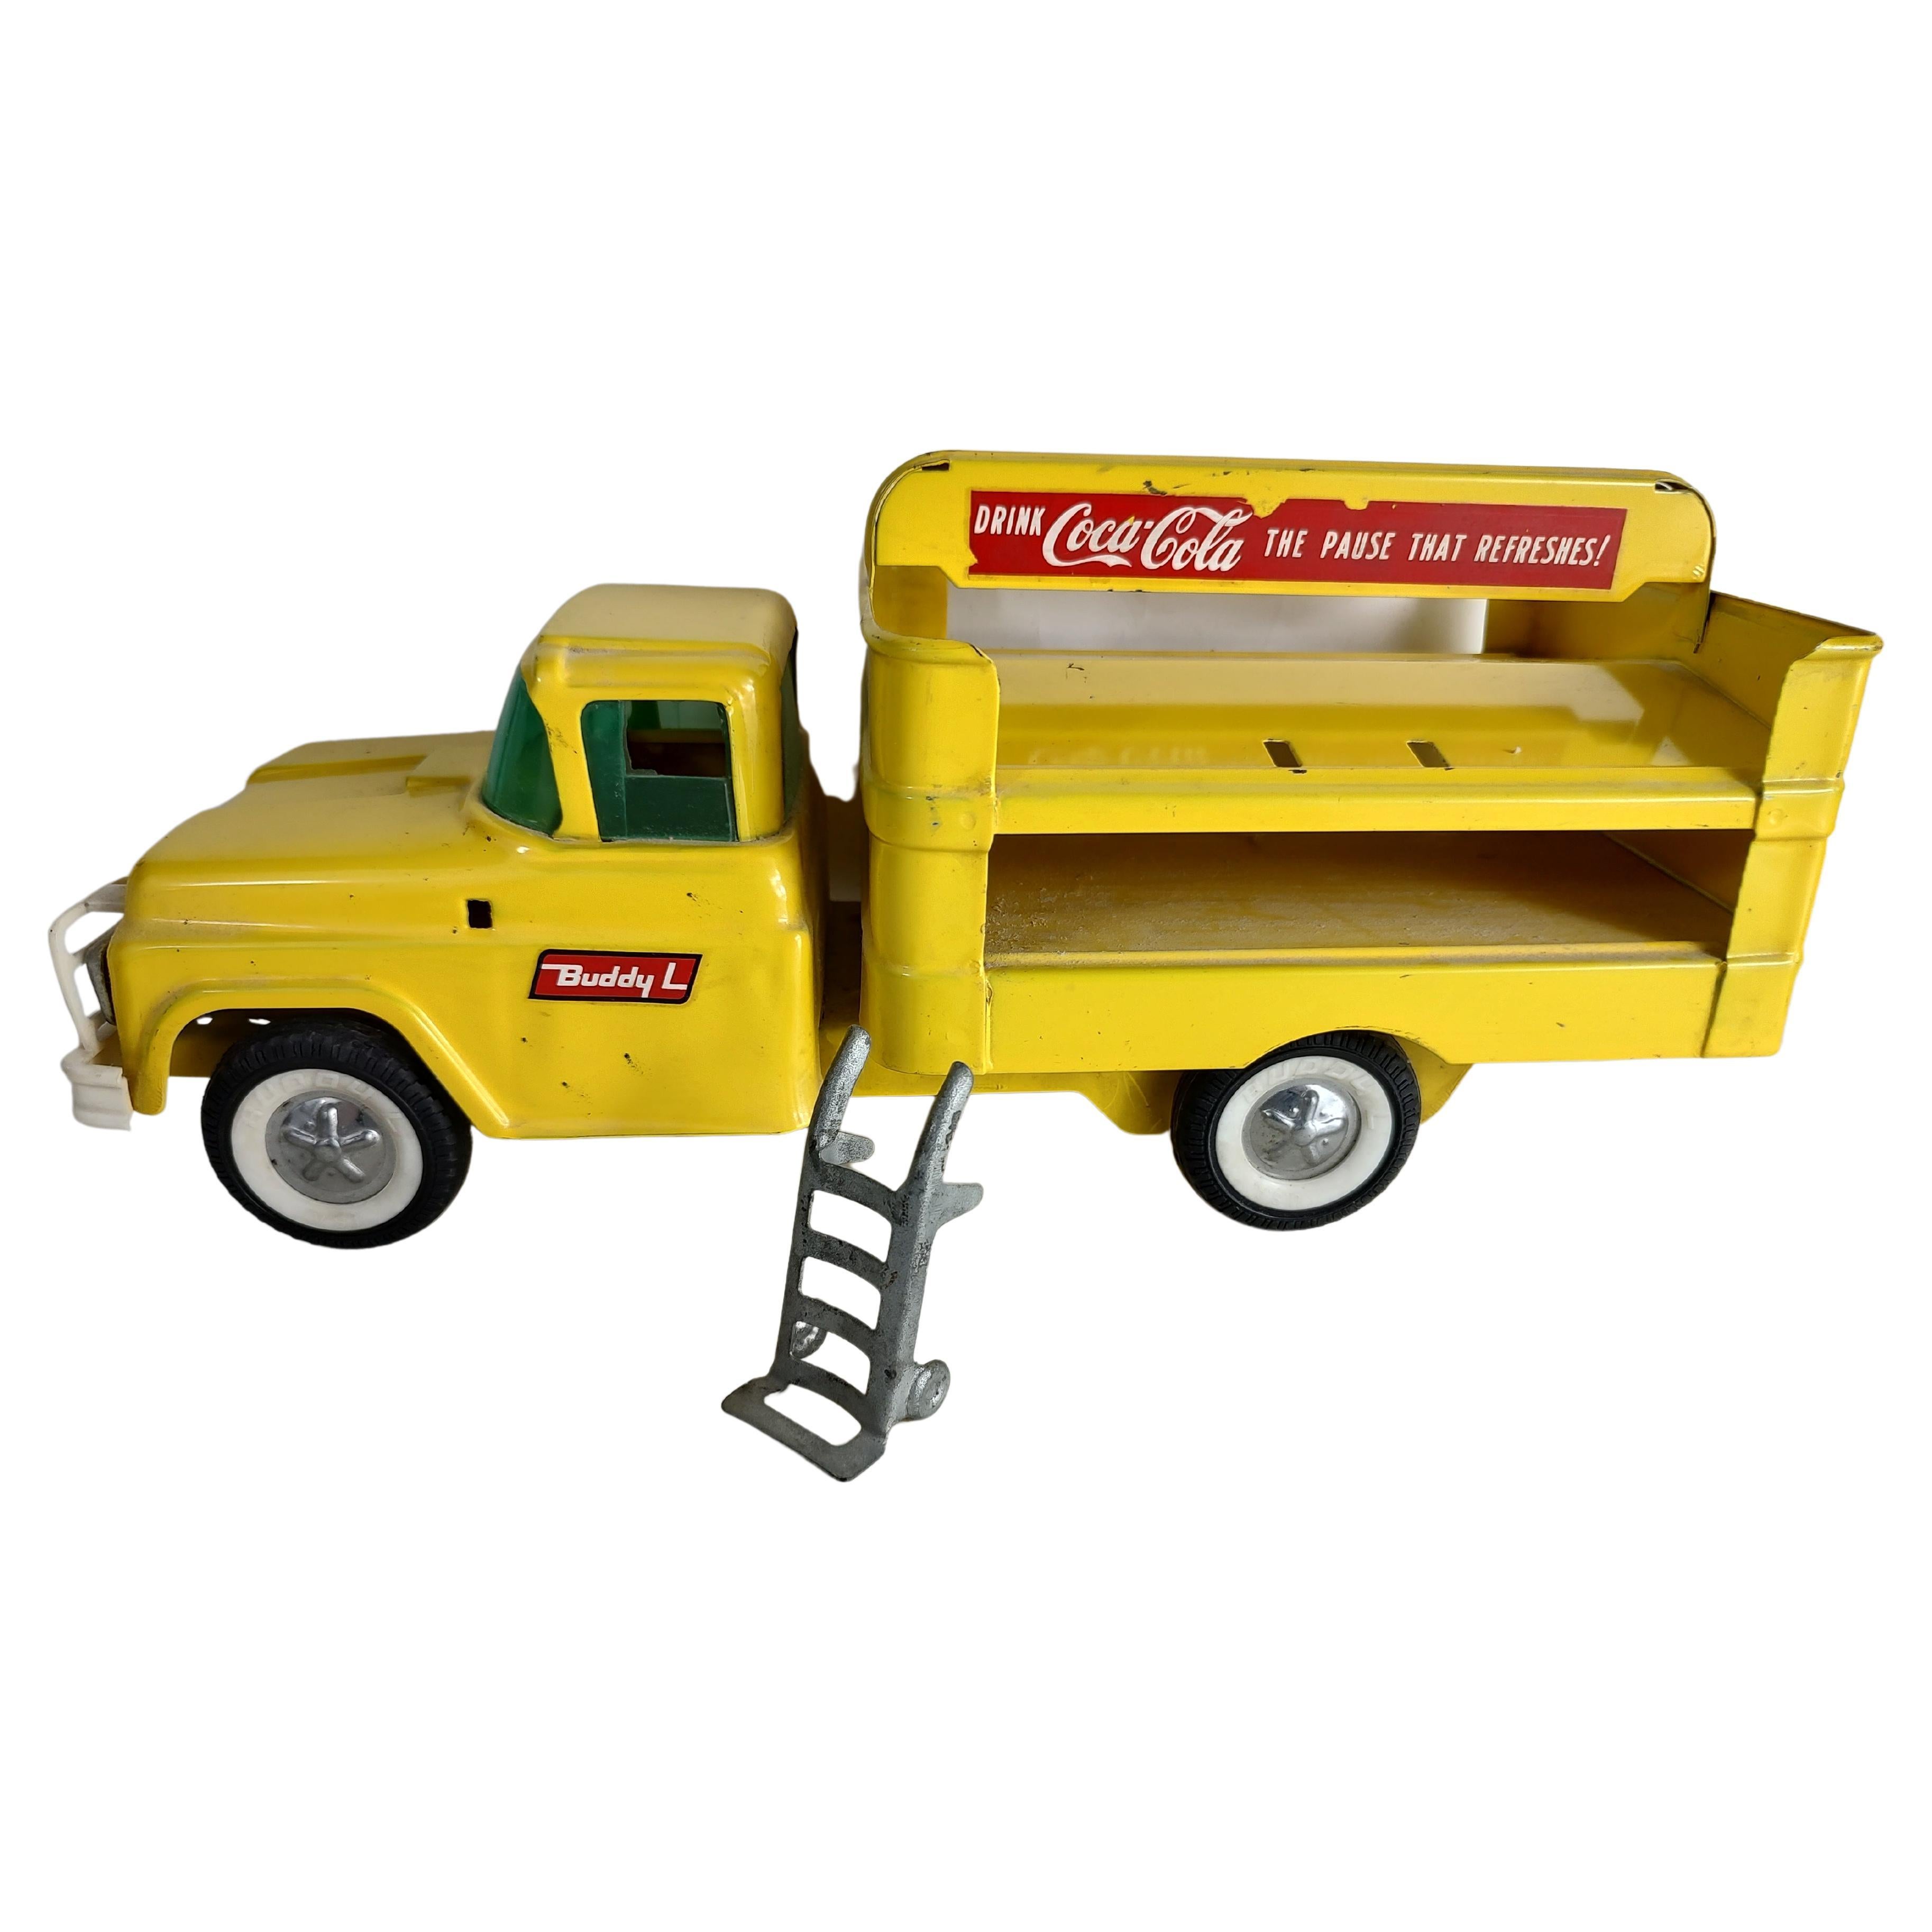 Mid Century Toy Coca Cola Delivery Truck by Buddy L